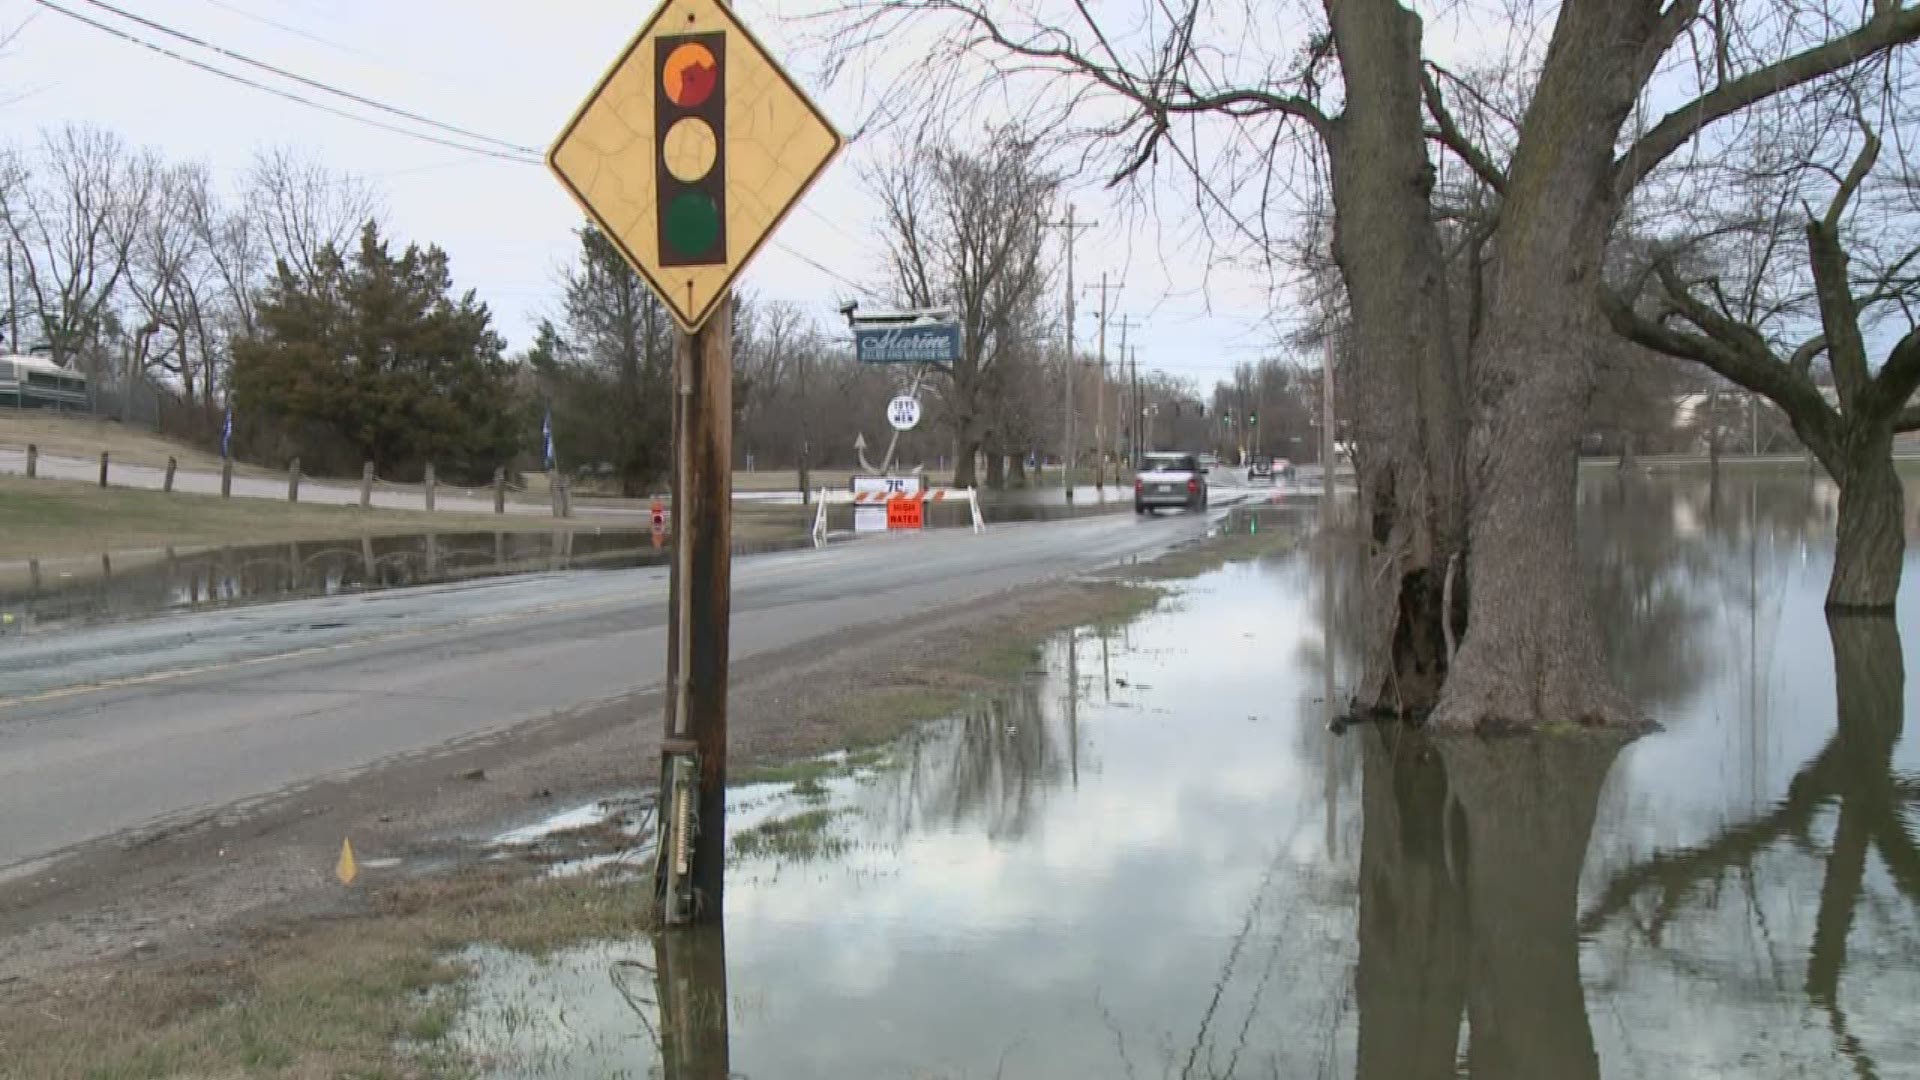 City officials are monitoring road closures as flooding is a problem in some parts in Louisville.